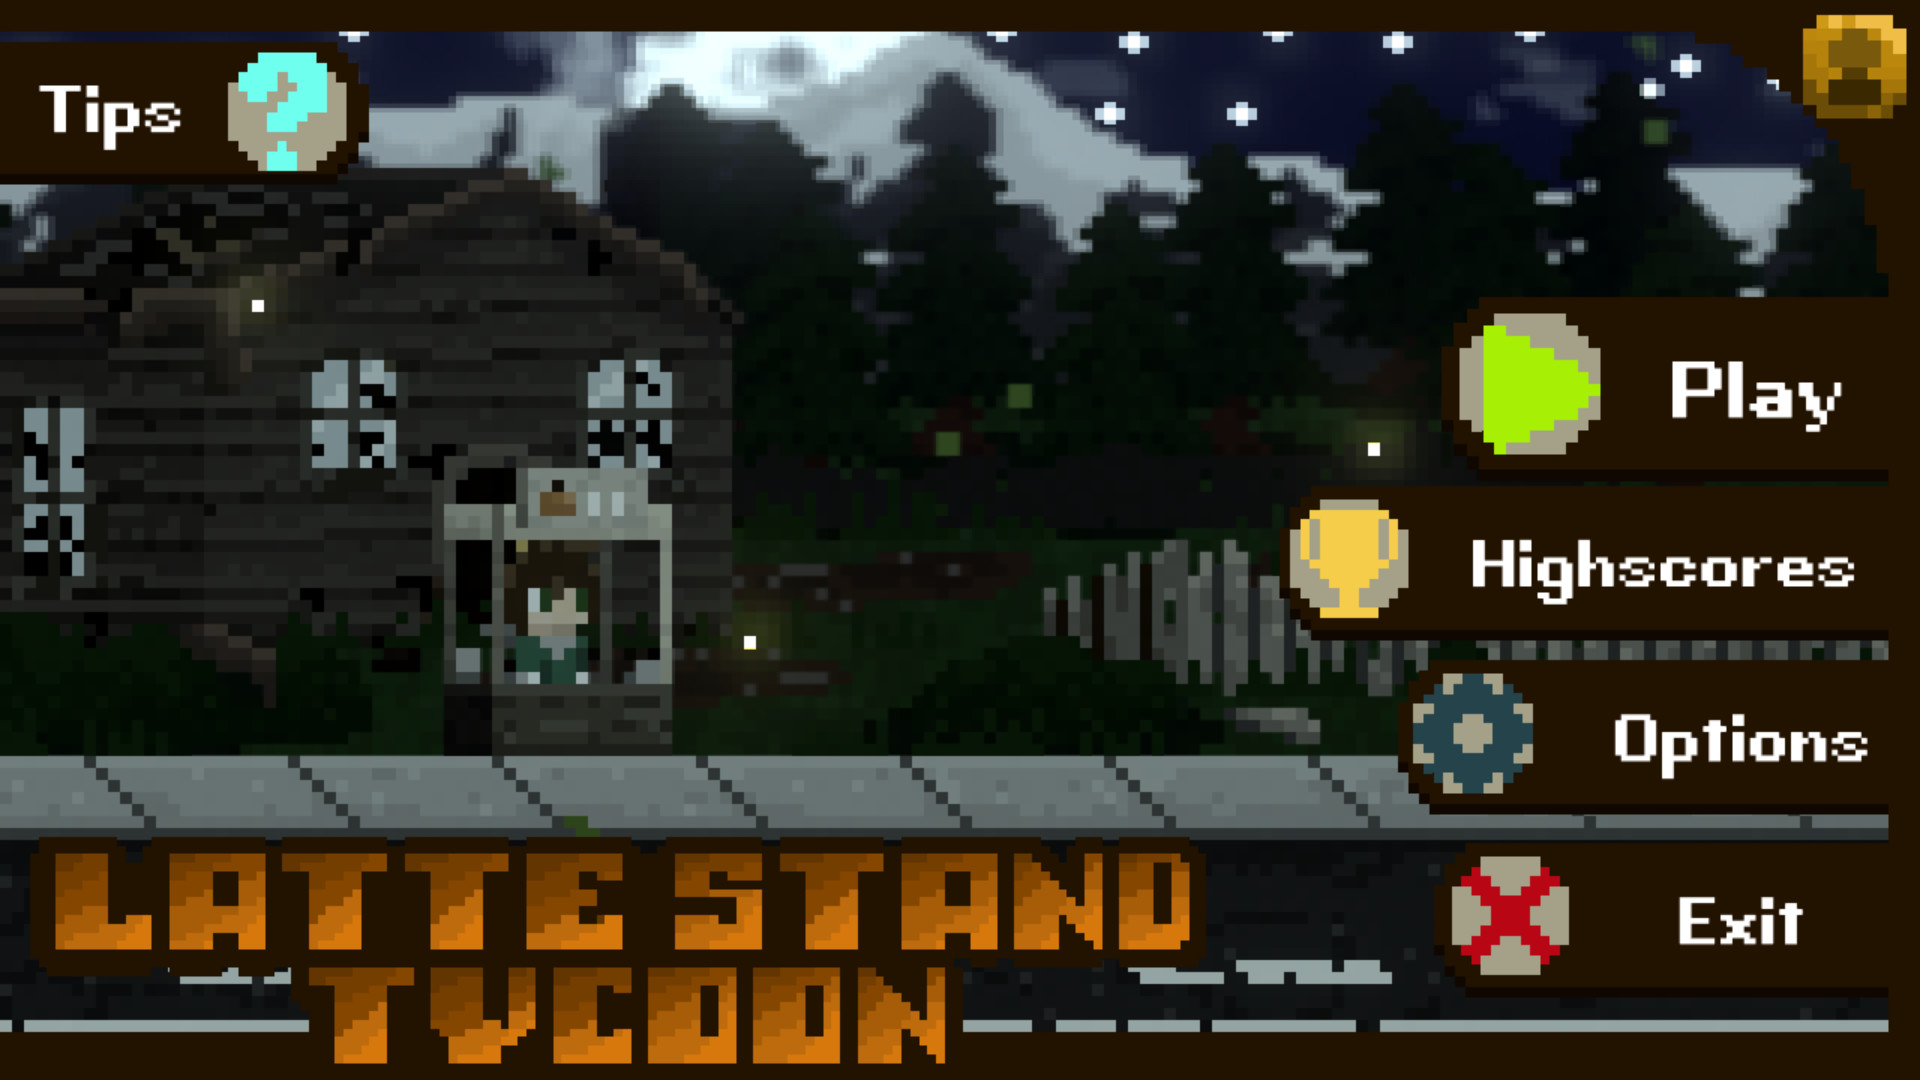 Latte Stand Tycoon Steam CD Key 0.7 USD